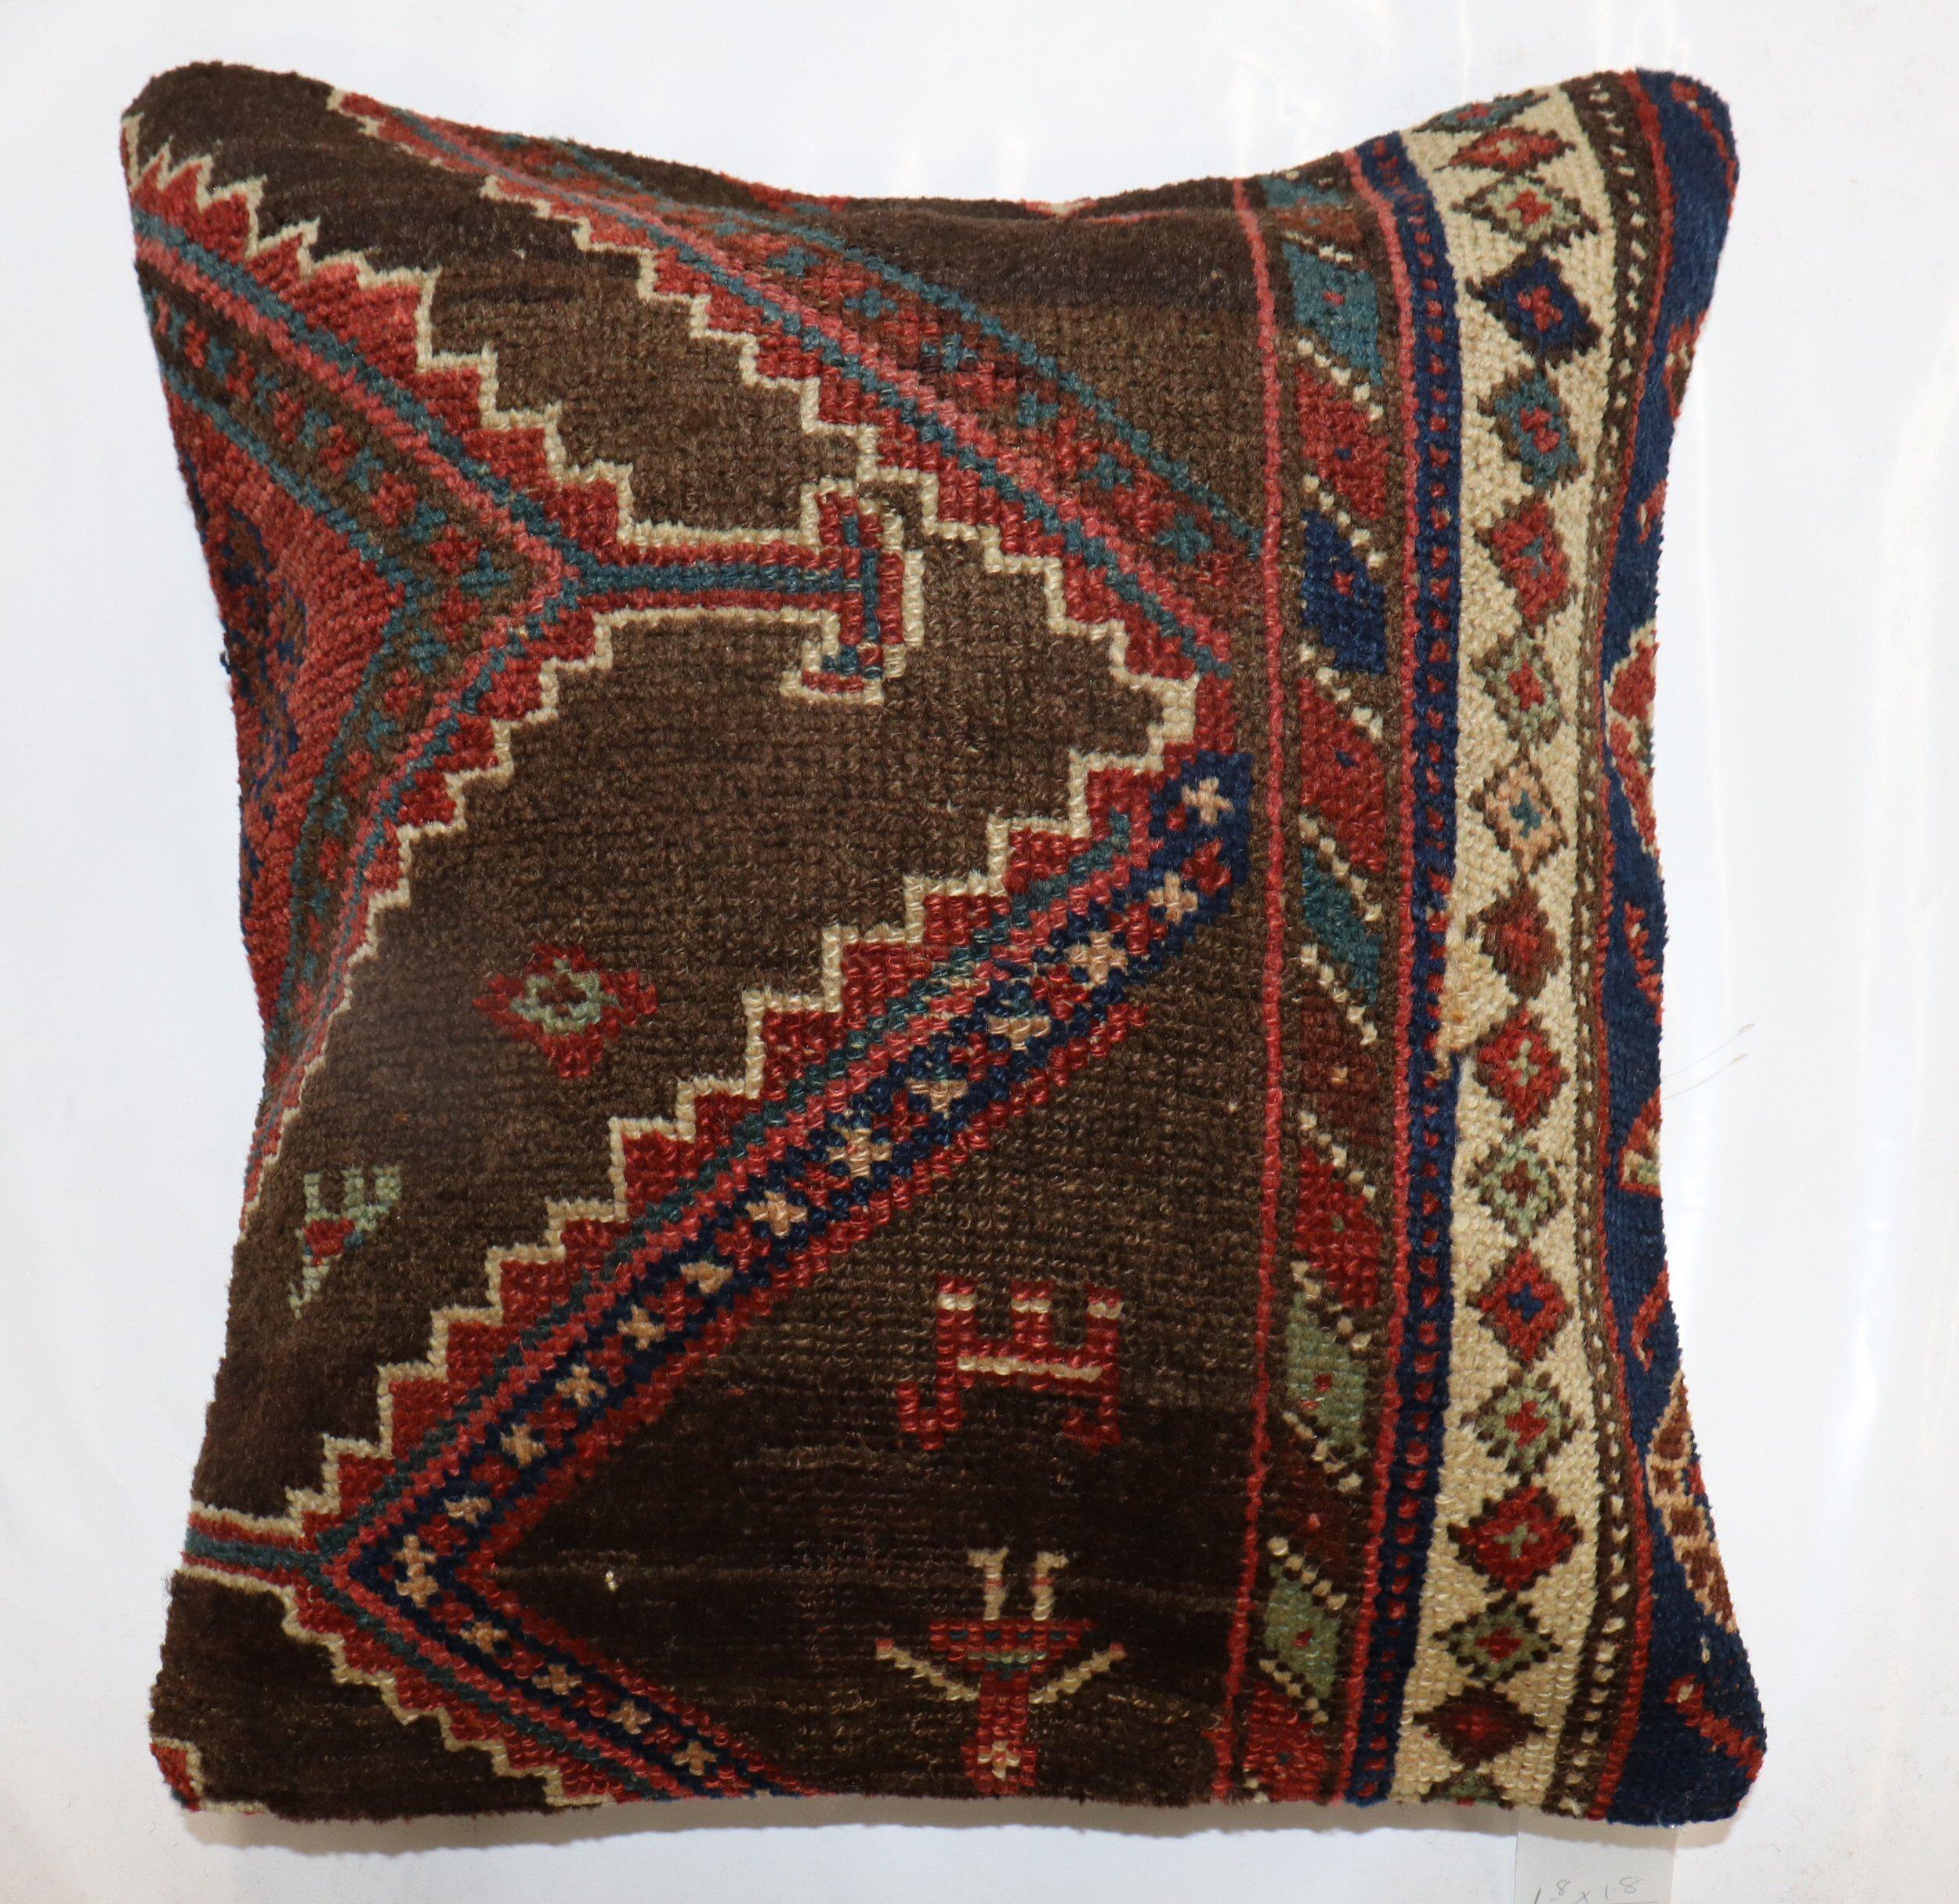 Pillow made from an early 20th-century Antique Persian Kurd Rug . Zipper closure and poly-fill provided.

Measures: 20'' x 20''